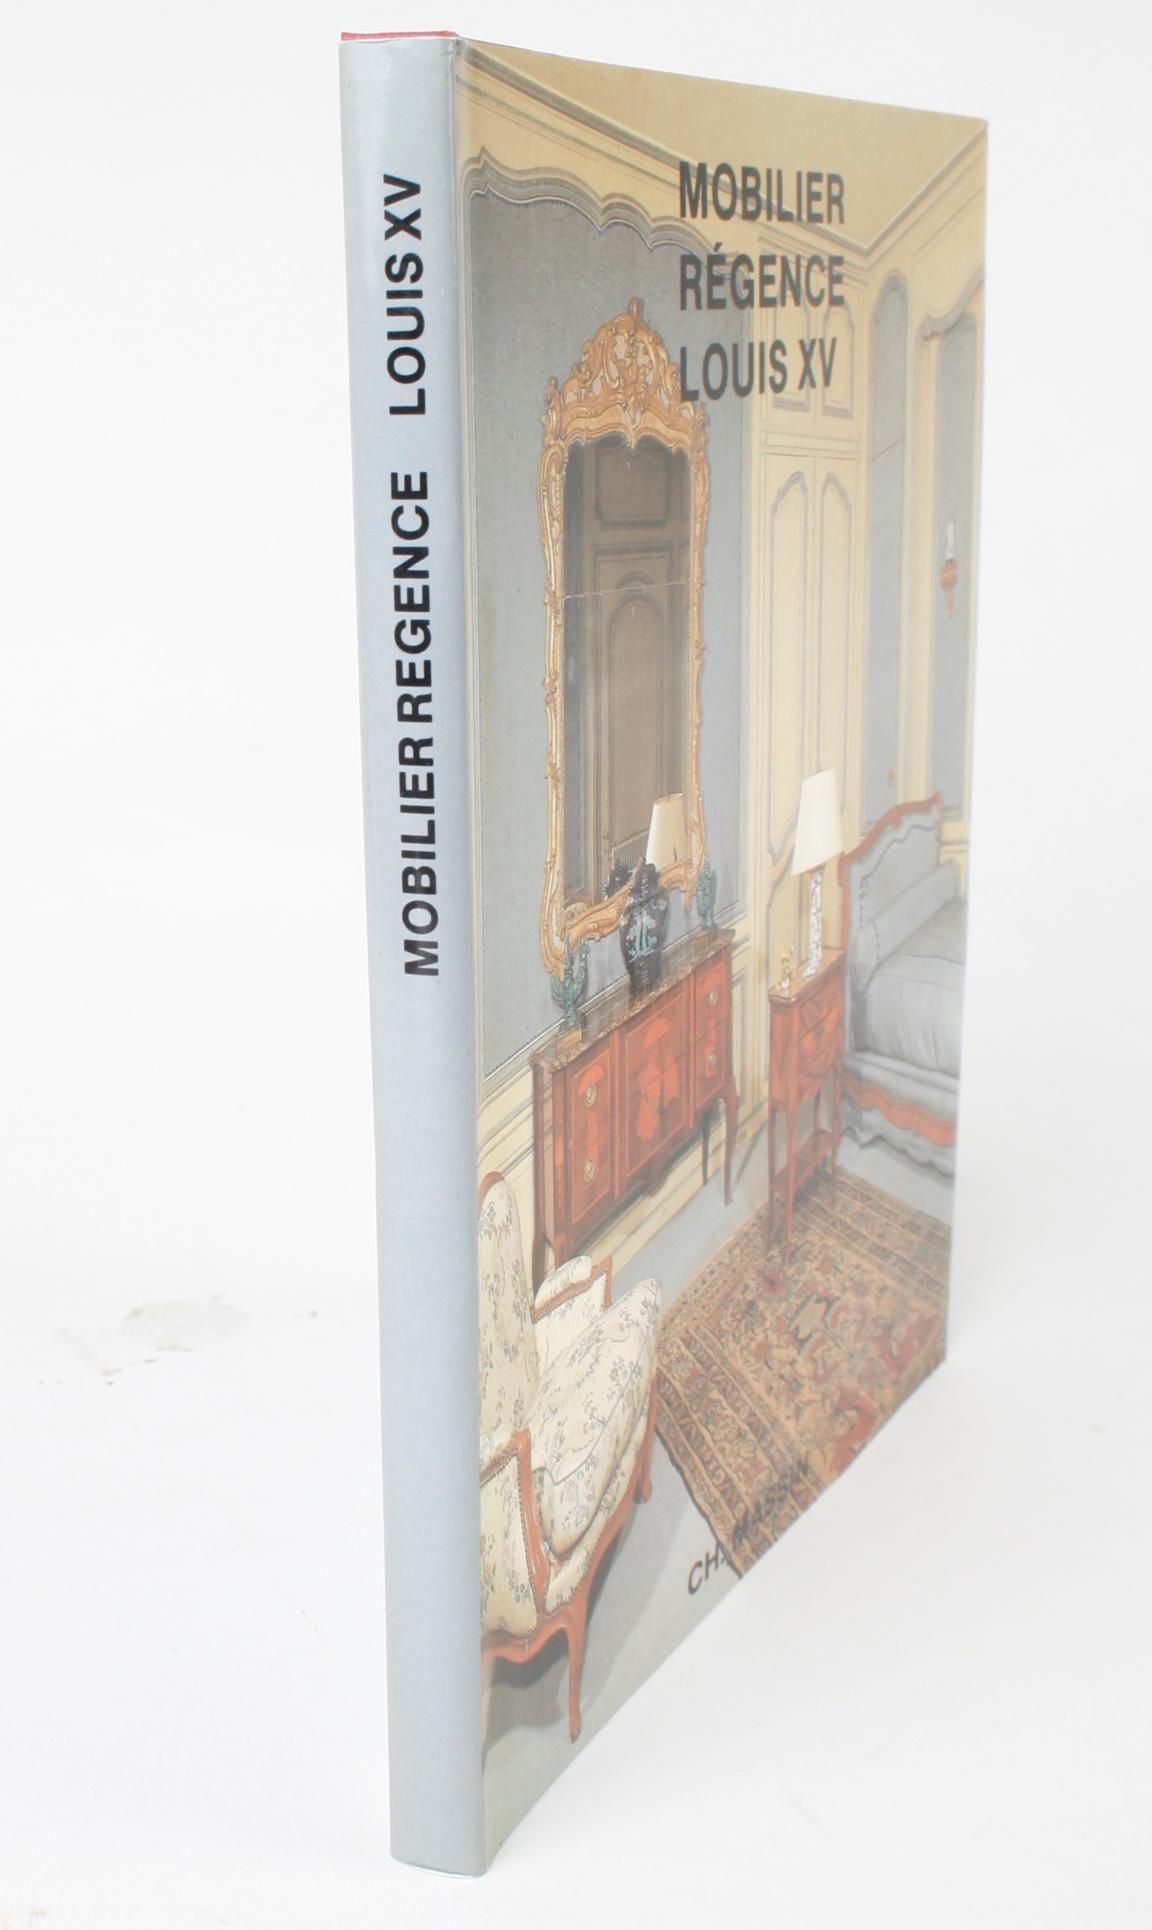 Mobilier Regence, Louis XV by Monica Burckhardt, First Edition 14